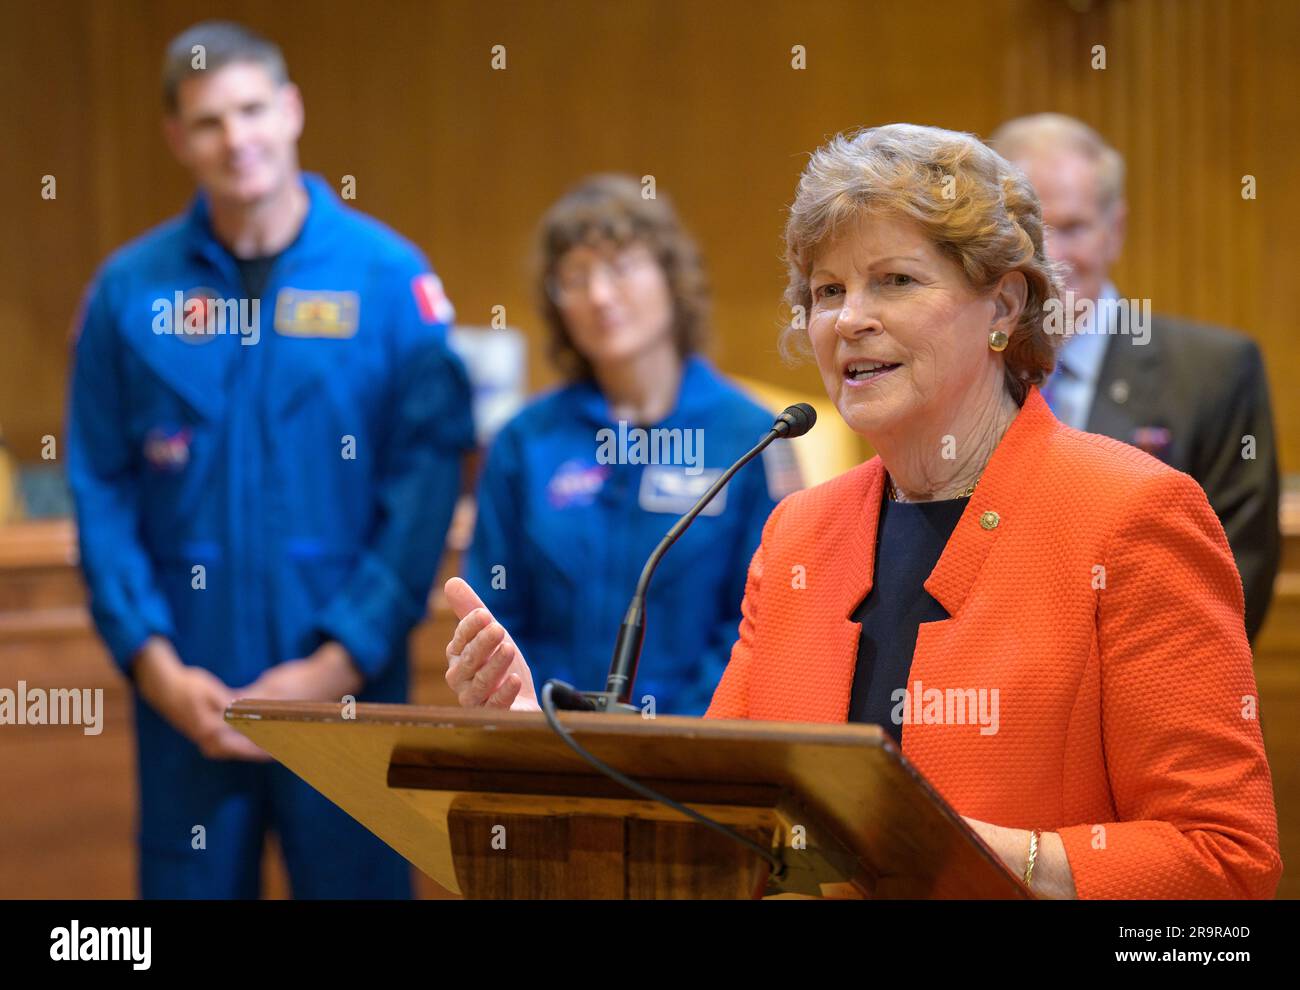 Artemis II Crew Senate Meet and Greet. Sen. Jeanne Shaheen, D-N.H., gives remarks as CSA (Canadian Space Agency) astronaut Jeremy Hansen, left, NASA Astronaut Christina Hammock Koch, look on during a meet and greet, Wednesday, May 17, 2023, at the Dirksen Senate Office Building in Washington. Hansen, Hammock Koch, along with NASA Astronauts Reid Wiseman and Victor Glover, who will fly around the Moon on NASA’s Artemis II flight test, visited Washington to discuss their upcoming mission with members of Congress and others. Stock Photo